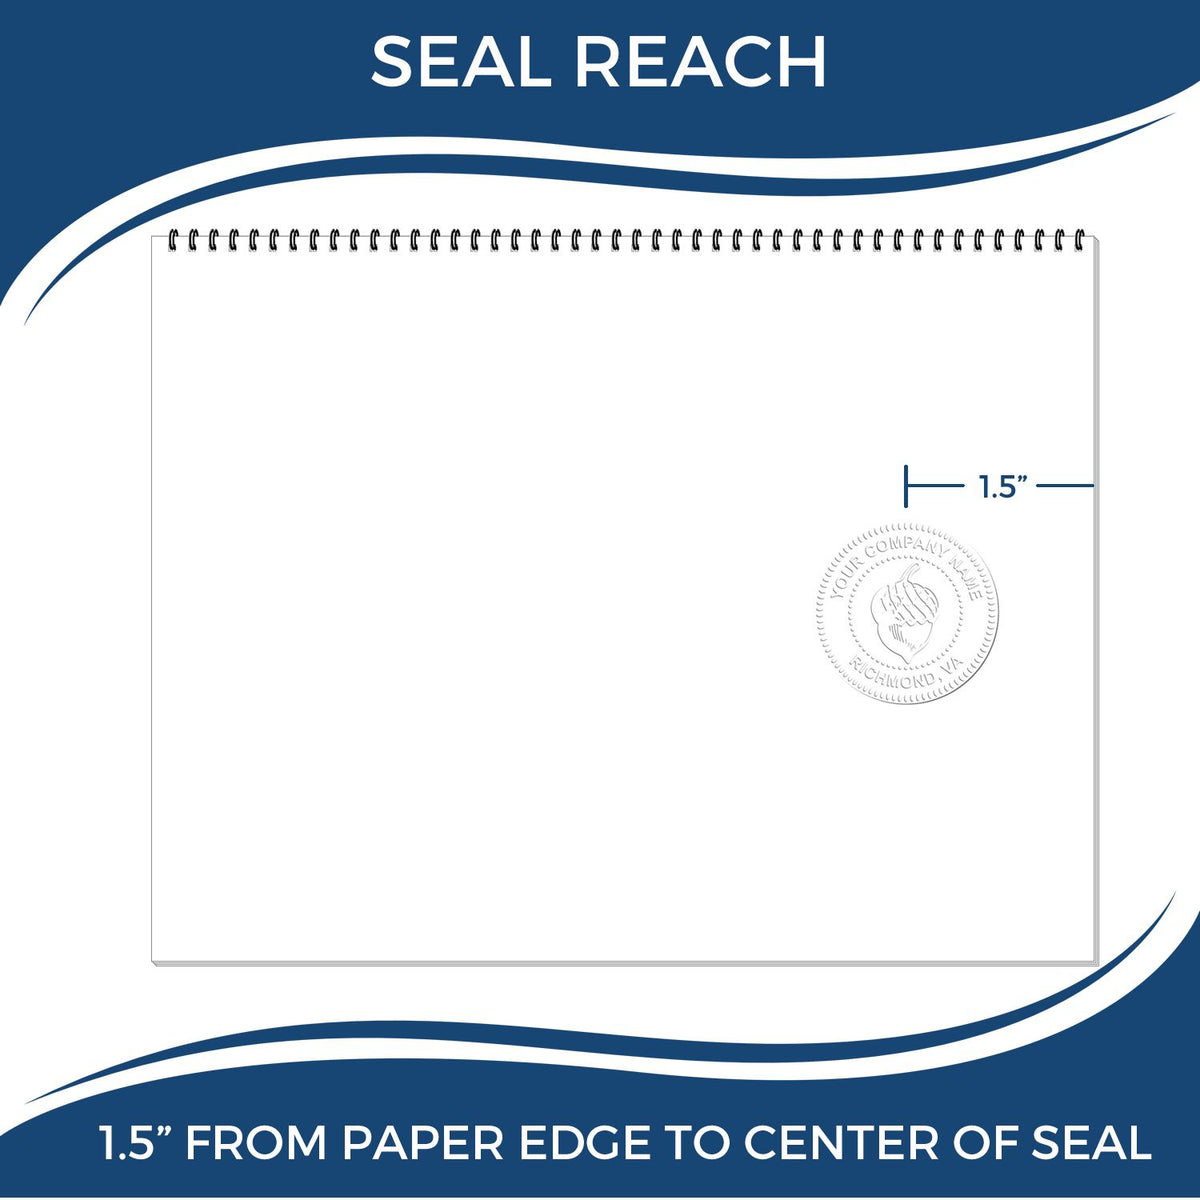 An infographic showing the seal reach which is represented by a ruler and a miniature seal image of the Hybrid Maryland Landscape Architect Seal